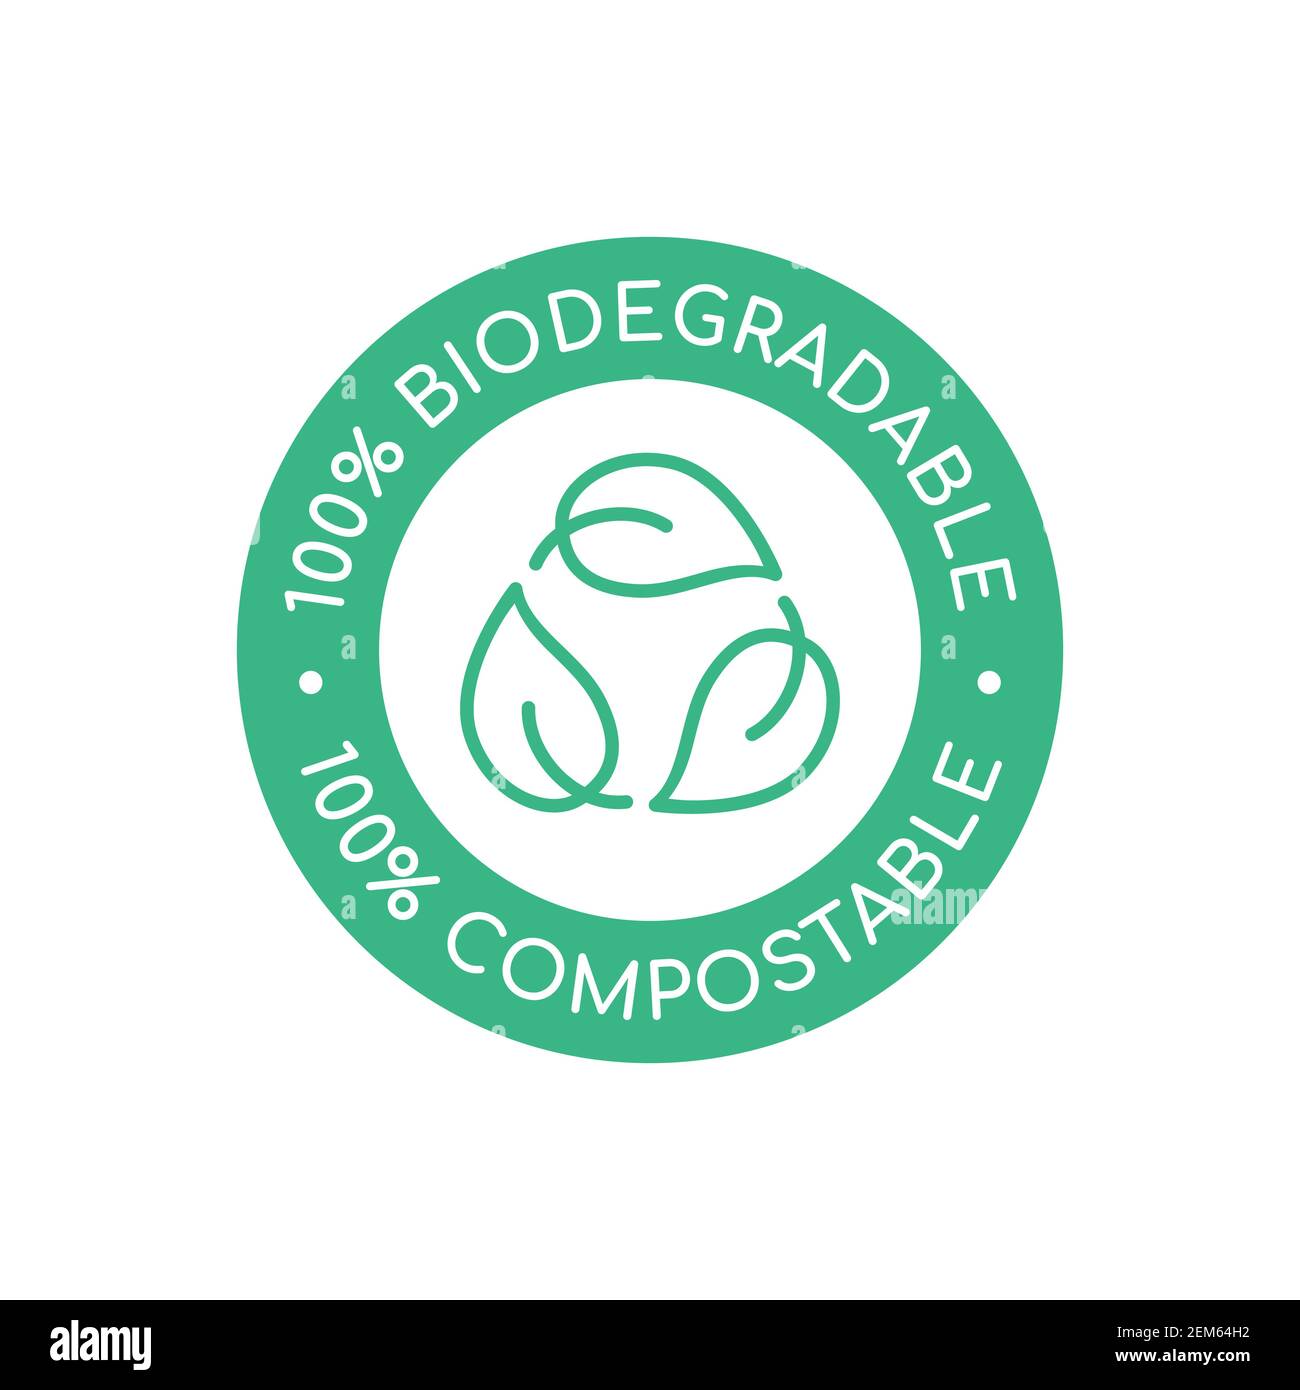 100% biodegradable 100% compostable icon, logo. Green leaves in a circle. Round biodegradable symbol. Natural recyclable packaging sign. Vector Stock Vector